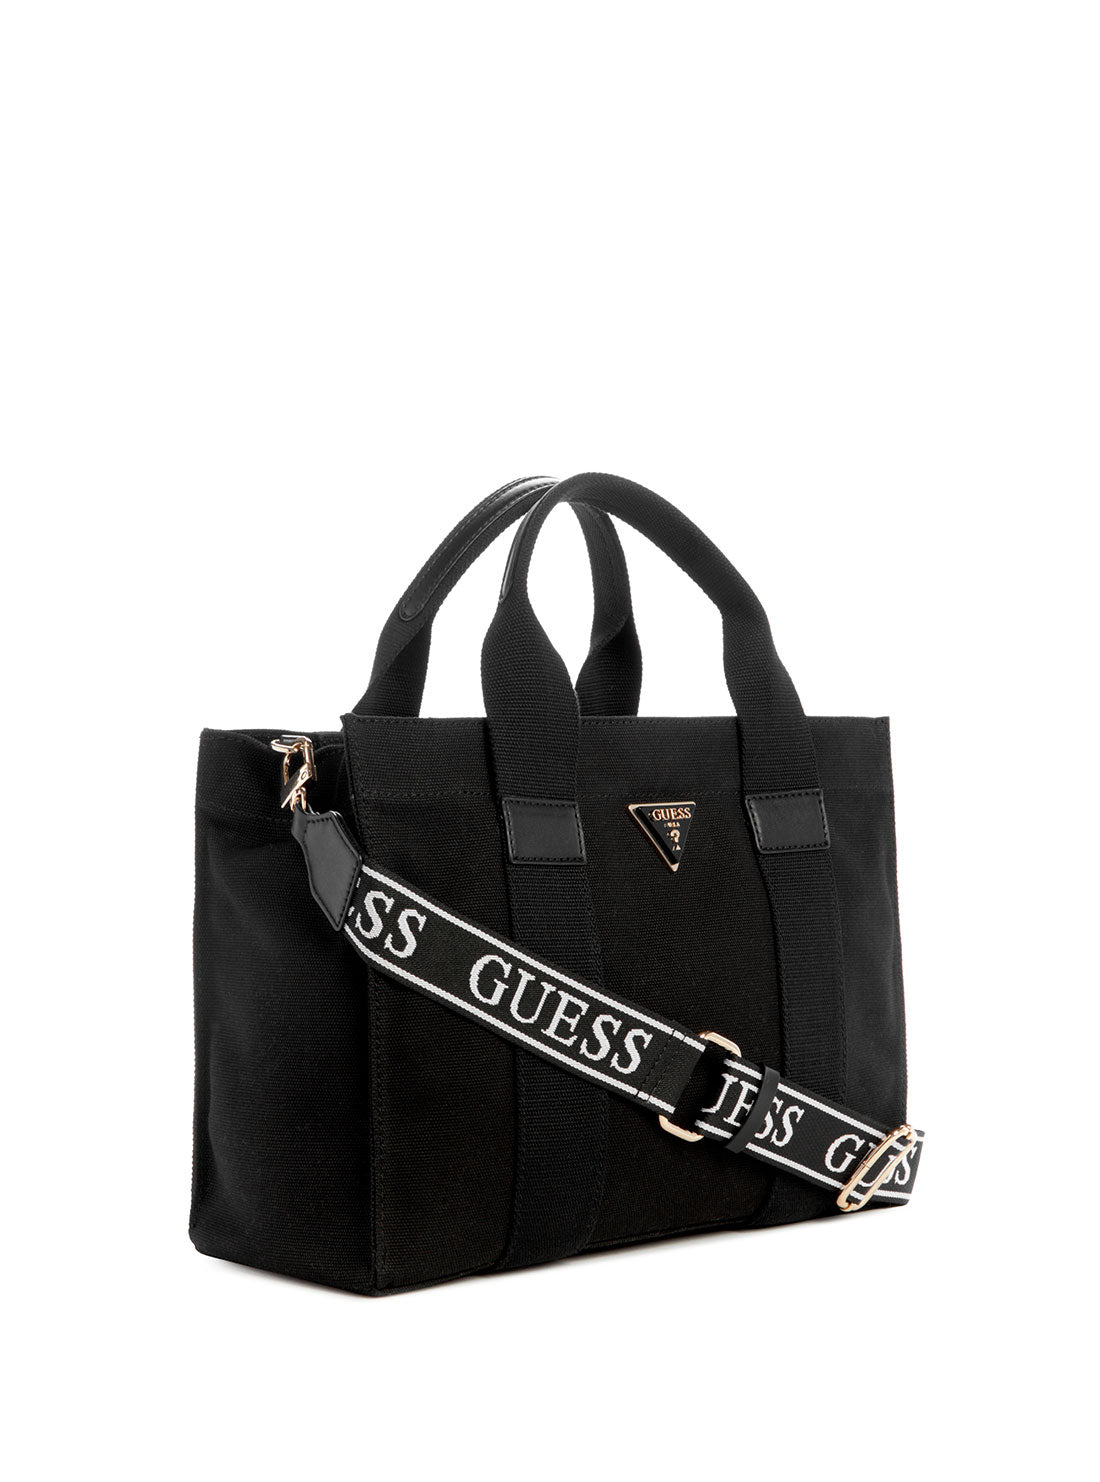 GUESS Black Canvas Small Tote Bag side view